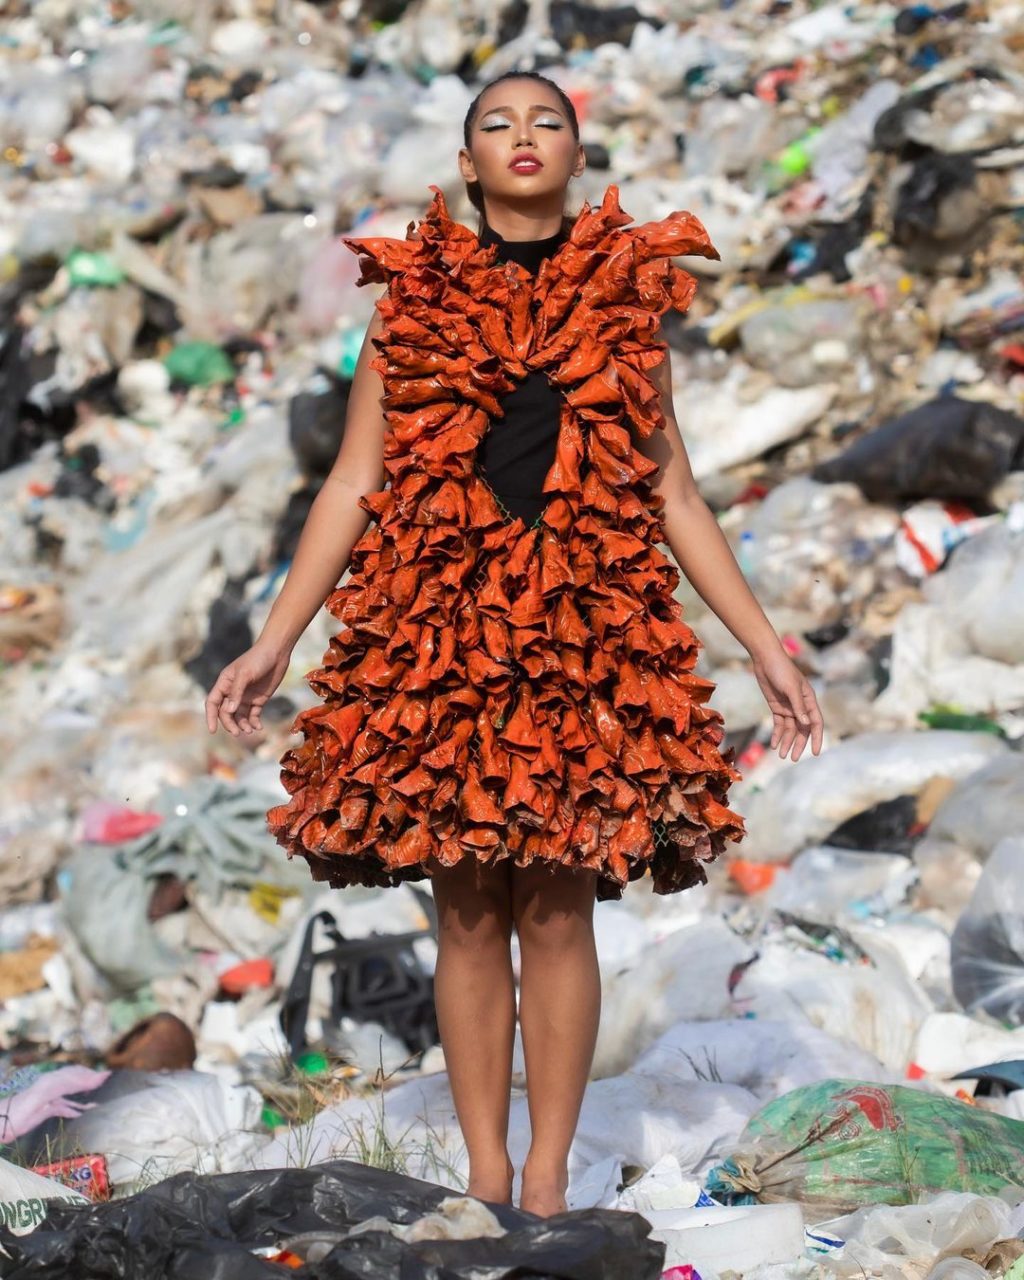 Guia Moreno stands in a landfill with wearing dress adorned with rolled plastic that are made to appear like rolled dried leaves.